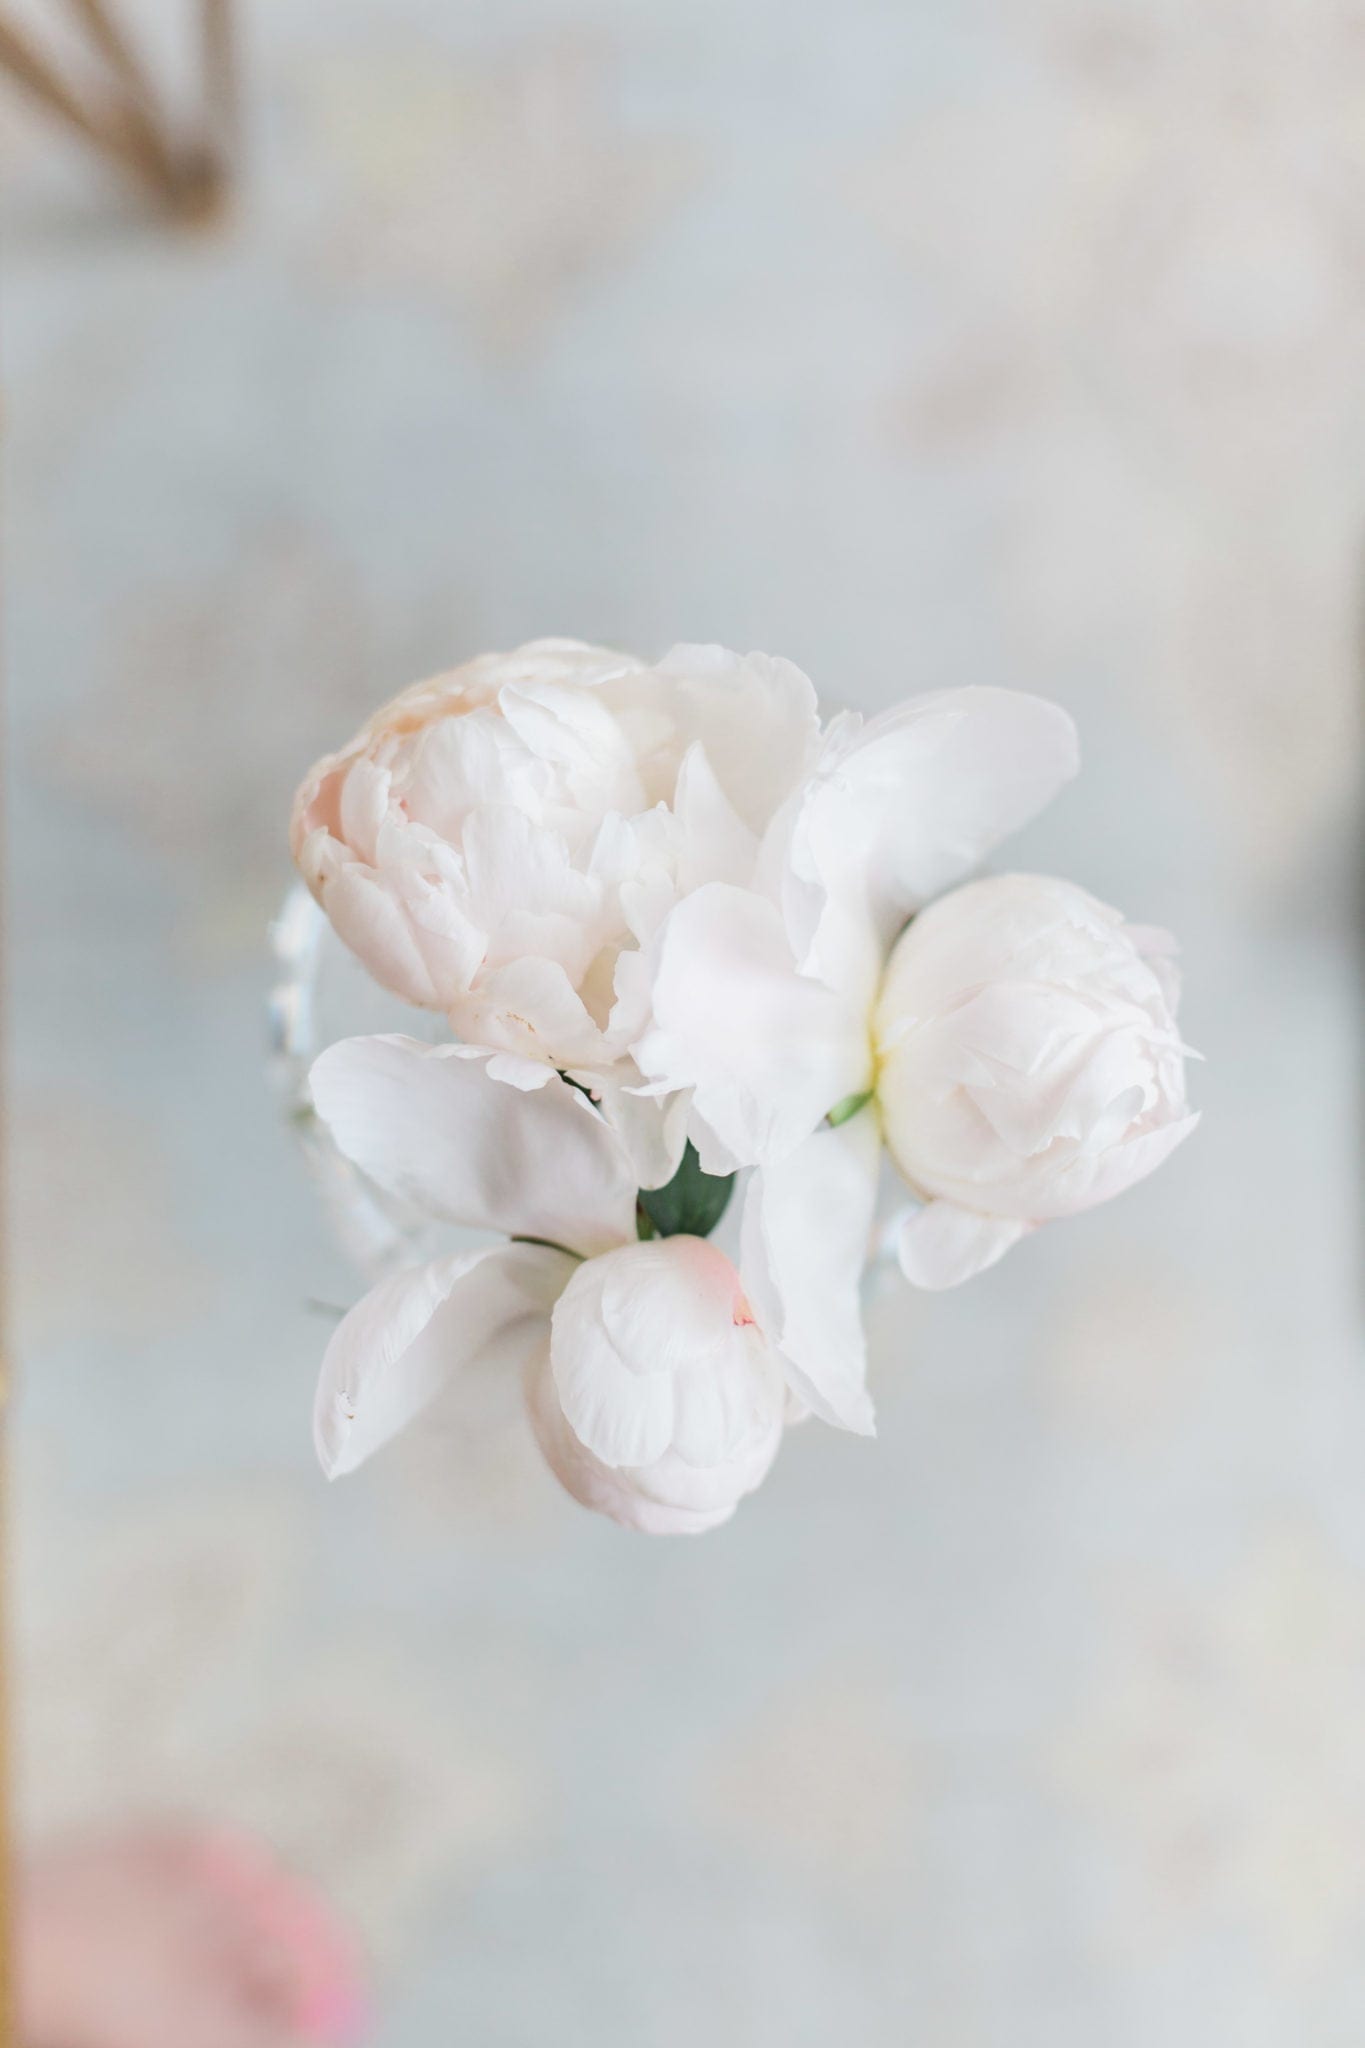 When to cut peony blooms and tricks for growing peonies.